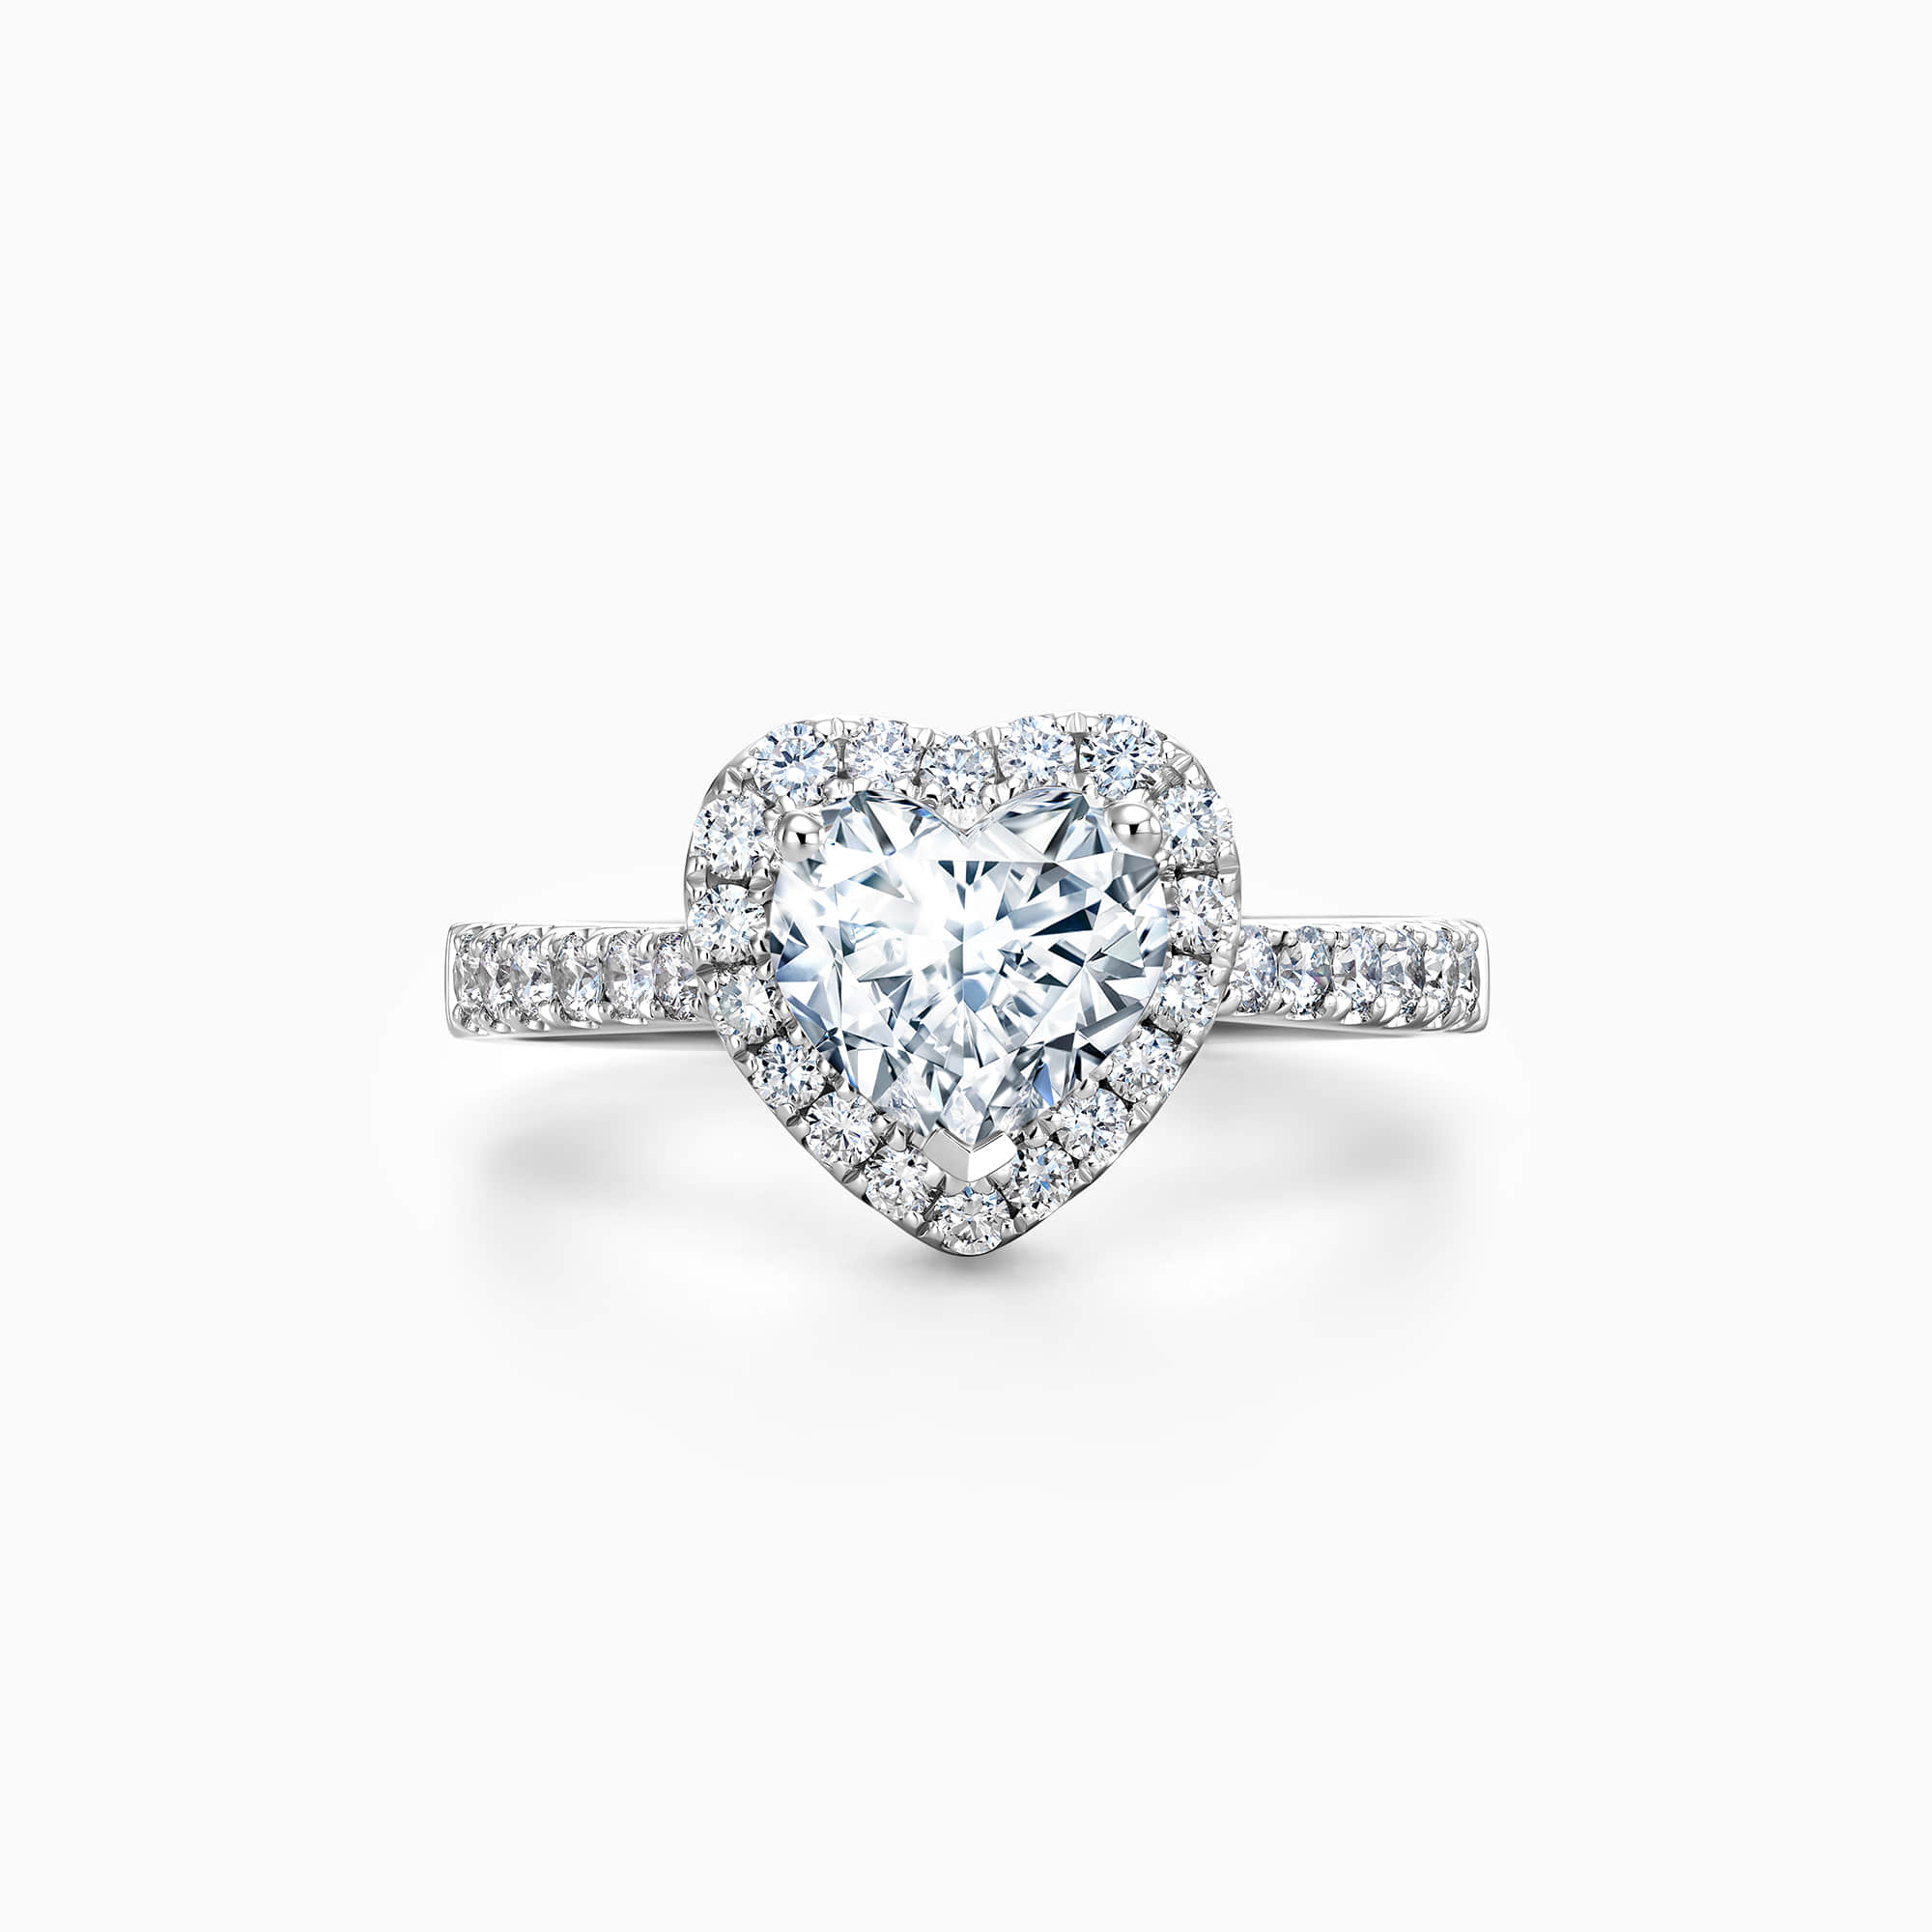 DR heart shaped engagement ring with halo